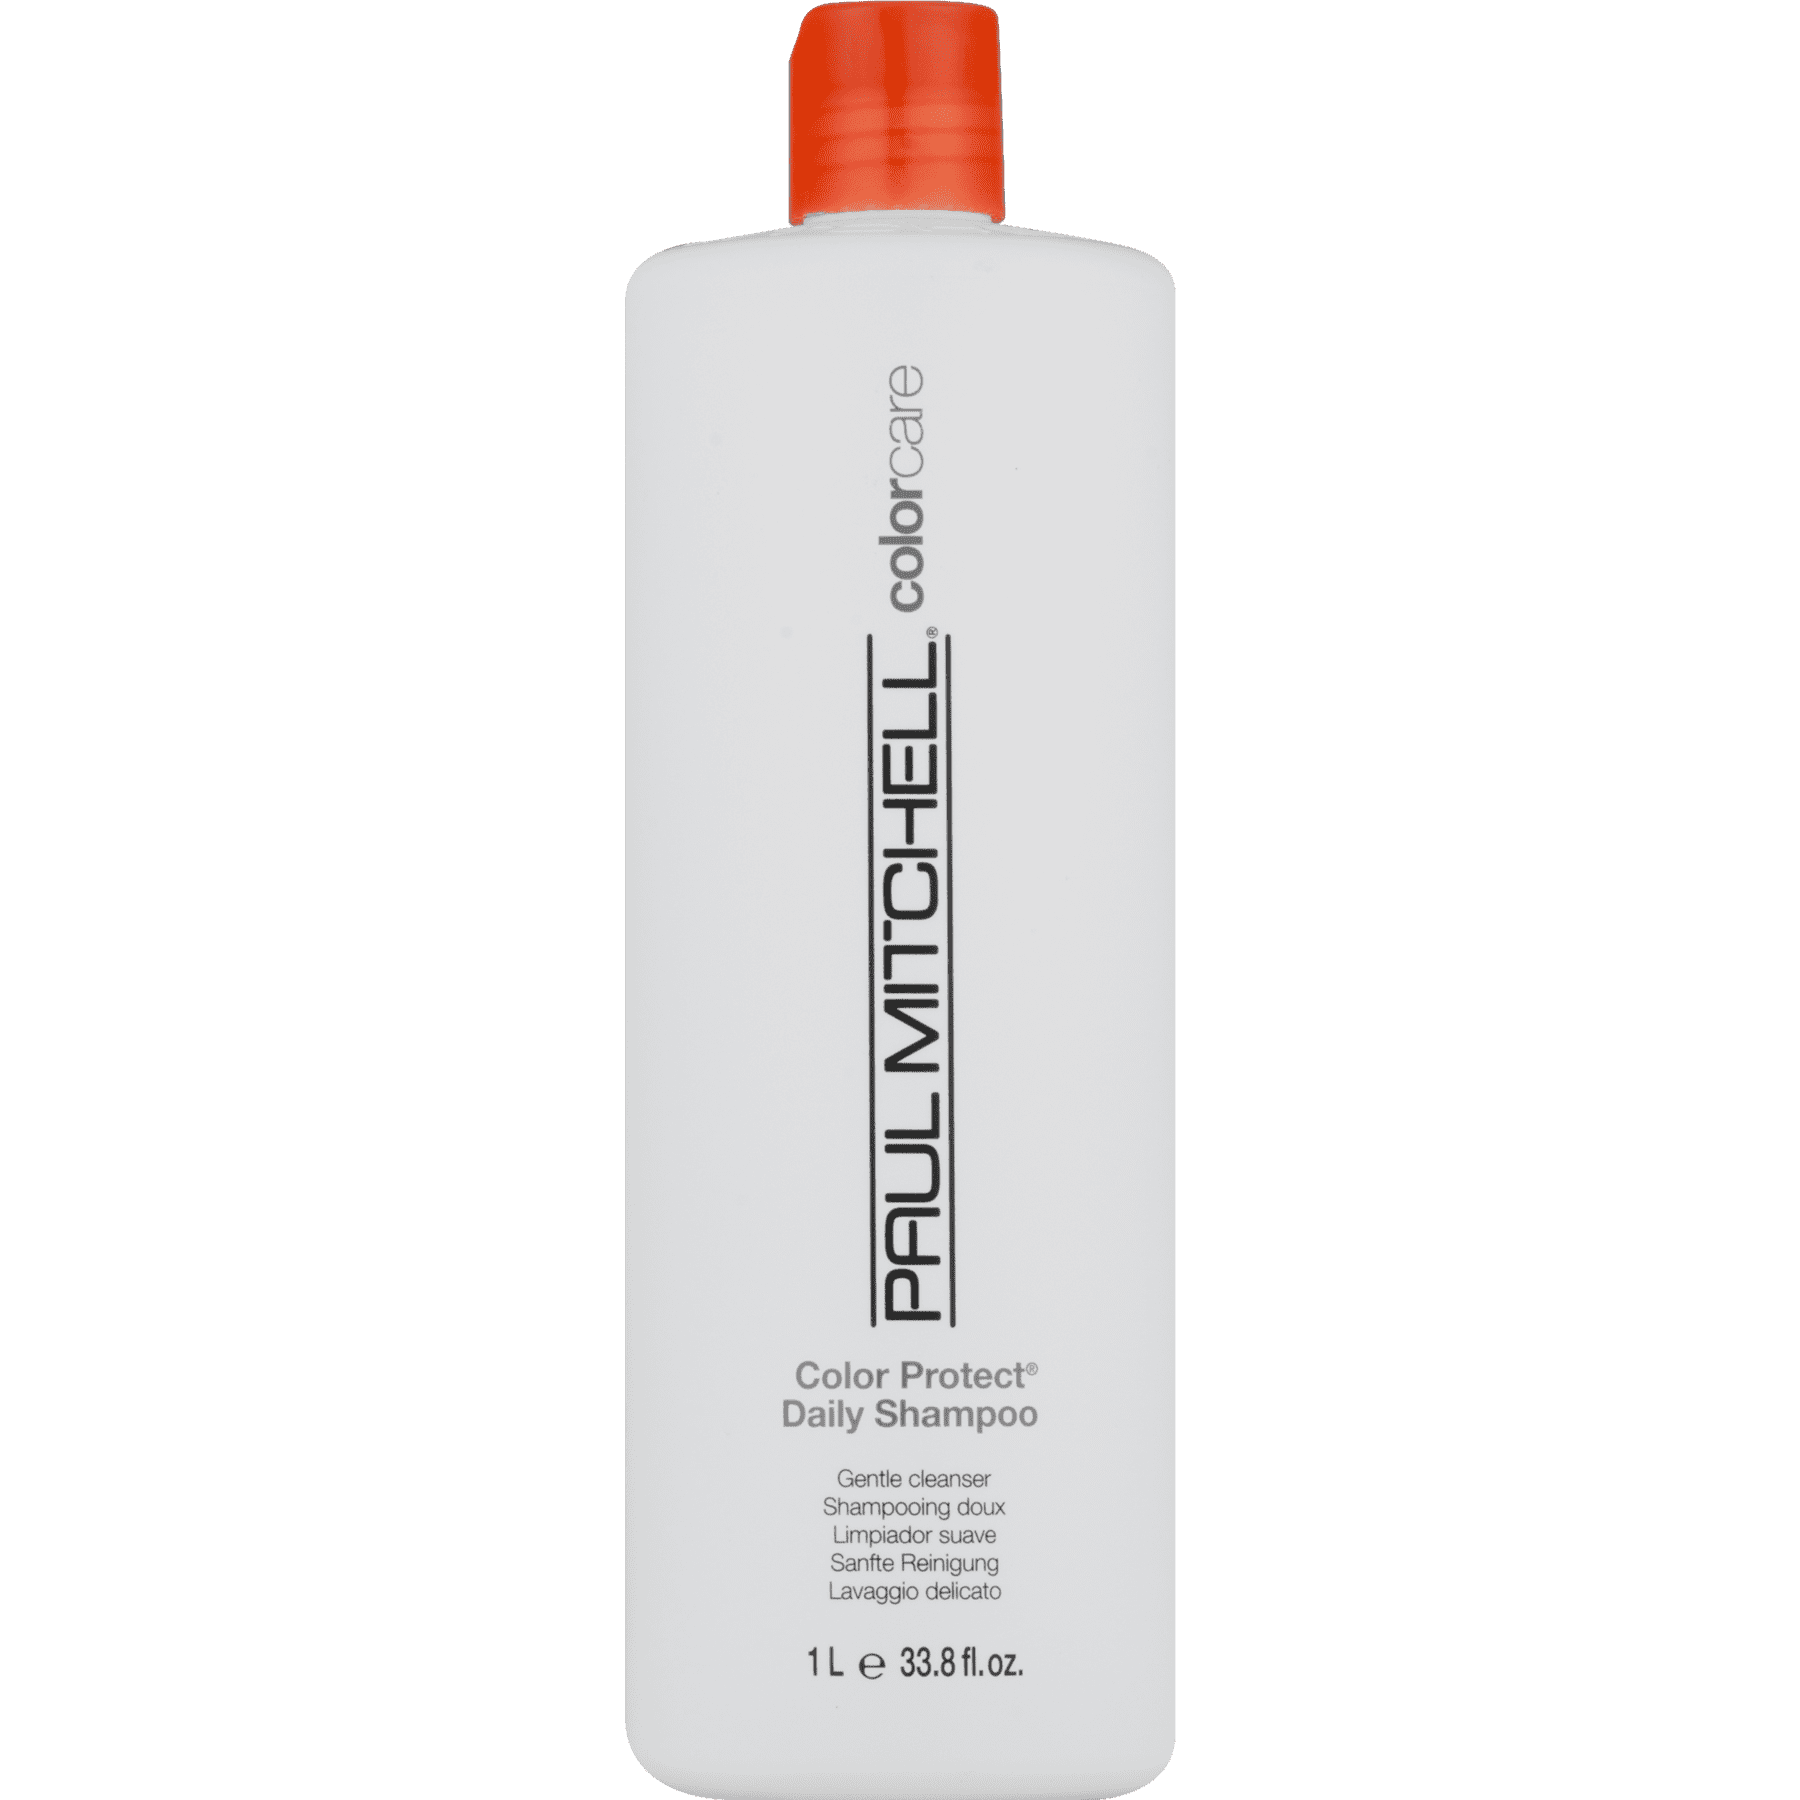 Colored hair shampoo. Paul Mitchell Color protect Daily Shampoo. Пробник Paul Mitchell шампунь. Paul Mitchell Color protect Daily Shampoo 250. Paul Mitchell Color protect.